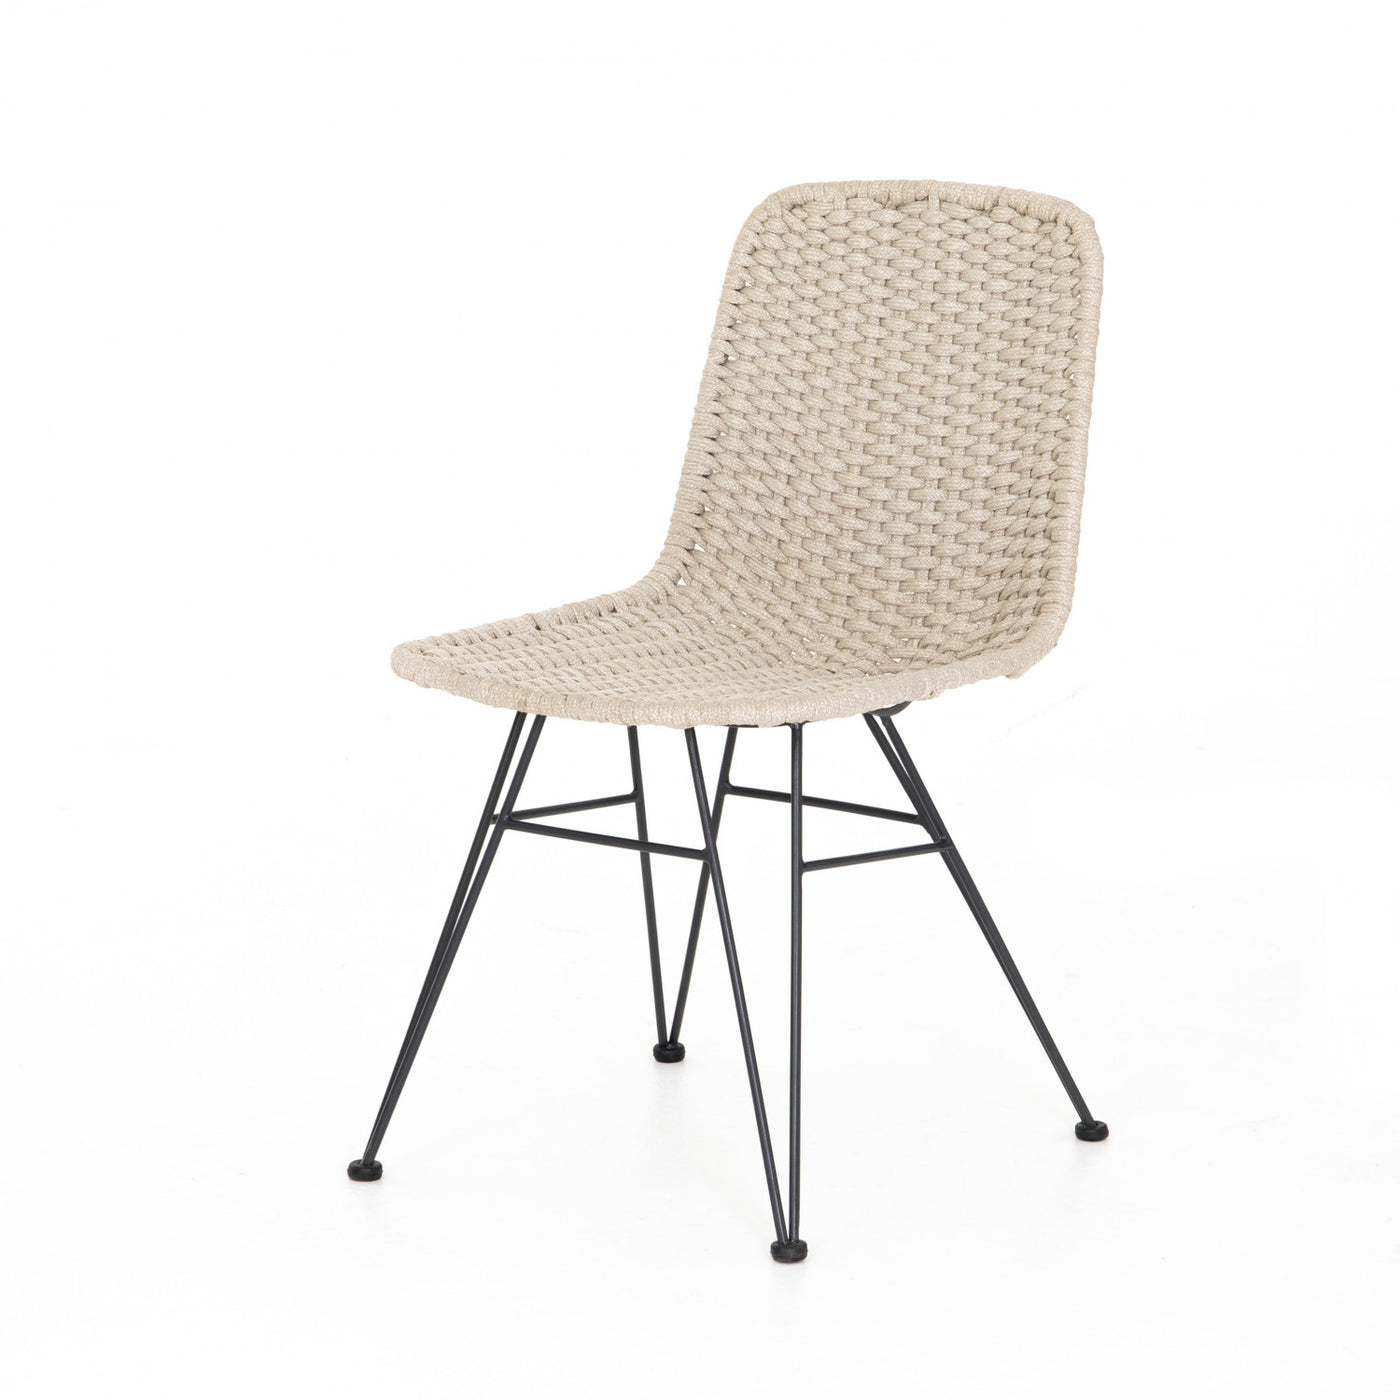 DEMA OUTDOOR DINING CHAIR